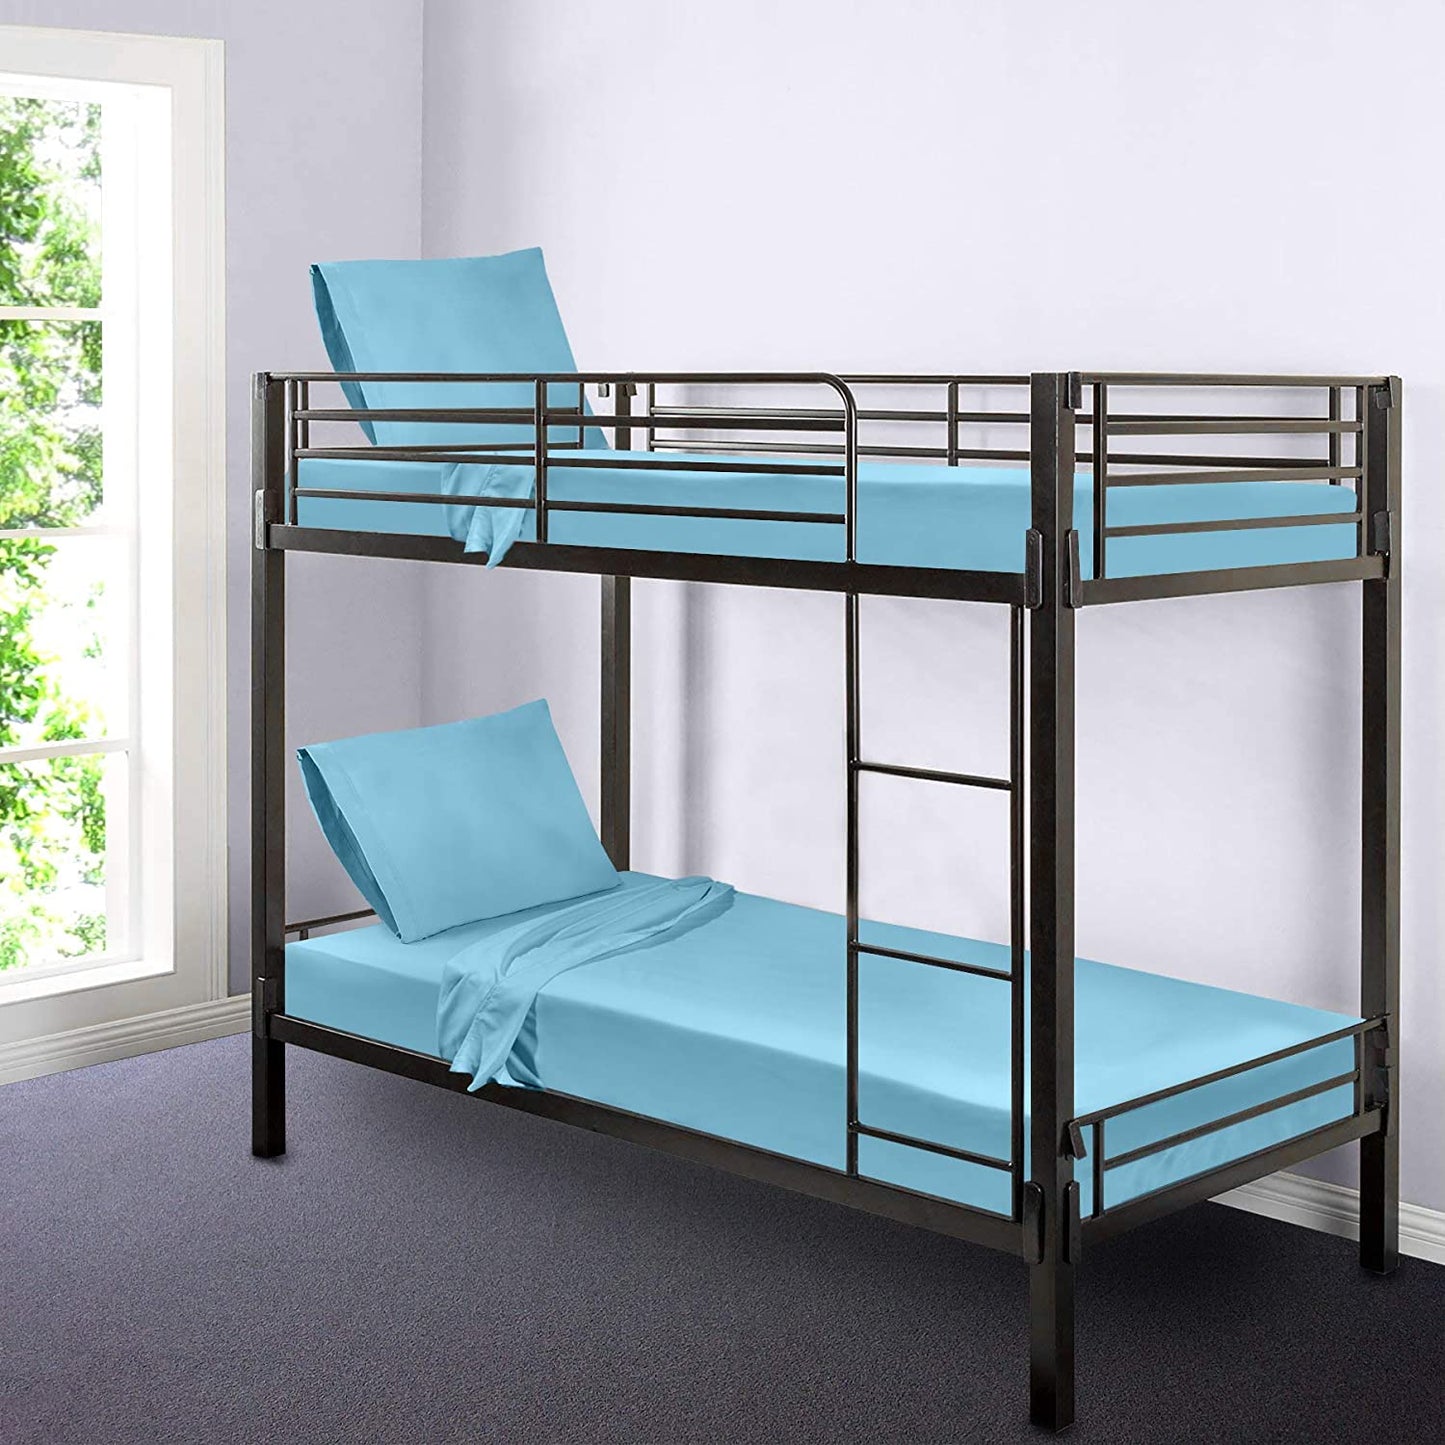 Gilbins 30" x 75" Cot Size 3-Piece Bed Sheet Set, Made of Ultra Soft Cotton, Perfect for Camp Bunk Beds/RVs/Guest Beds Blue